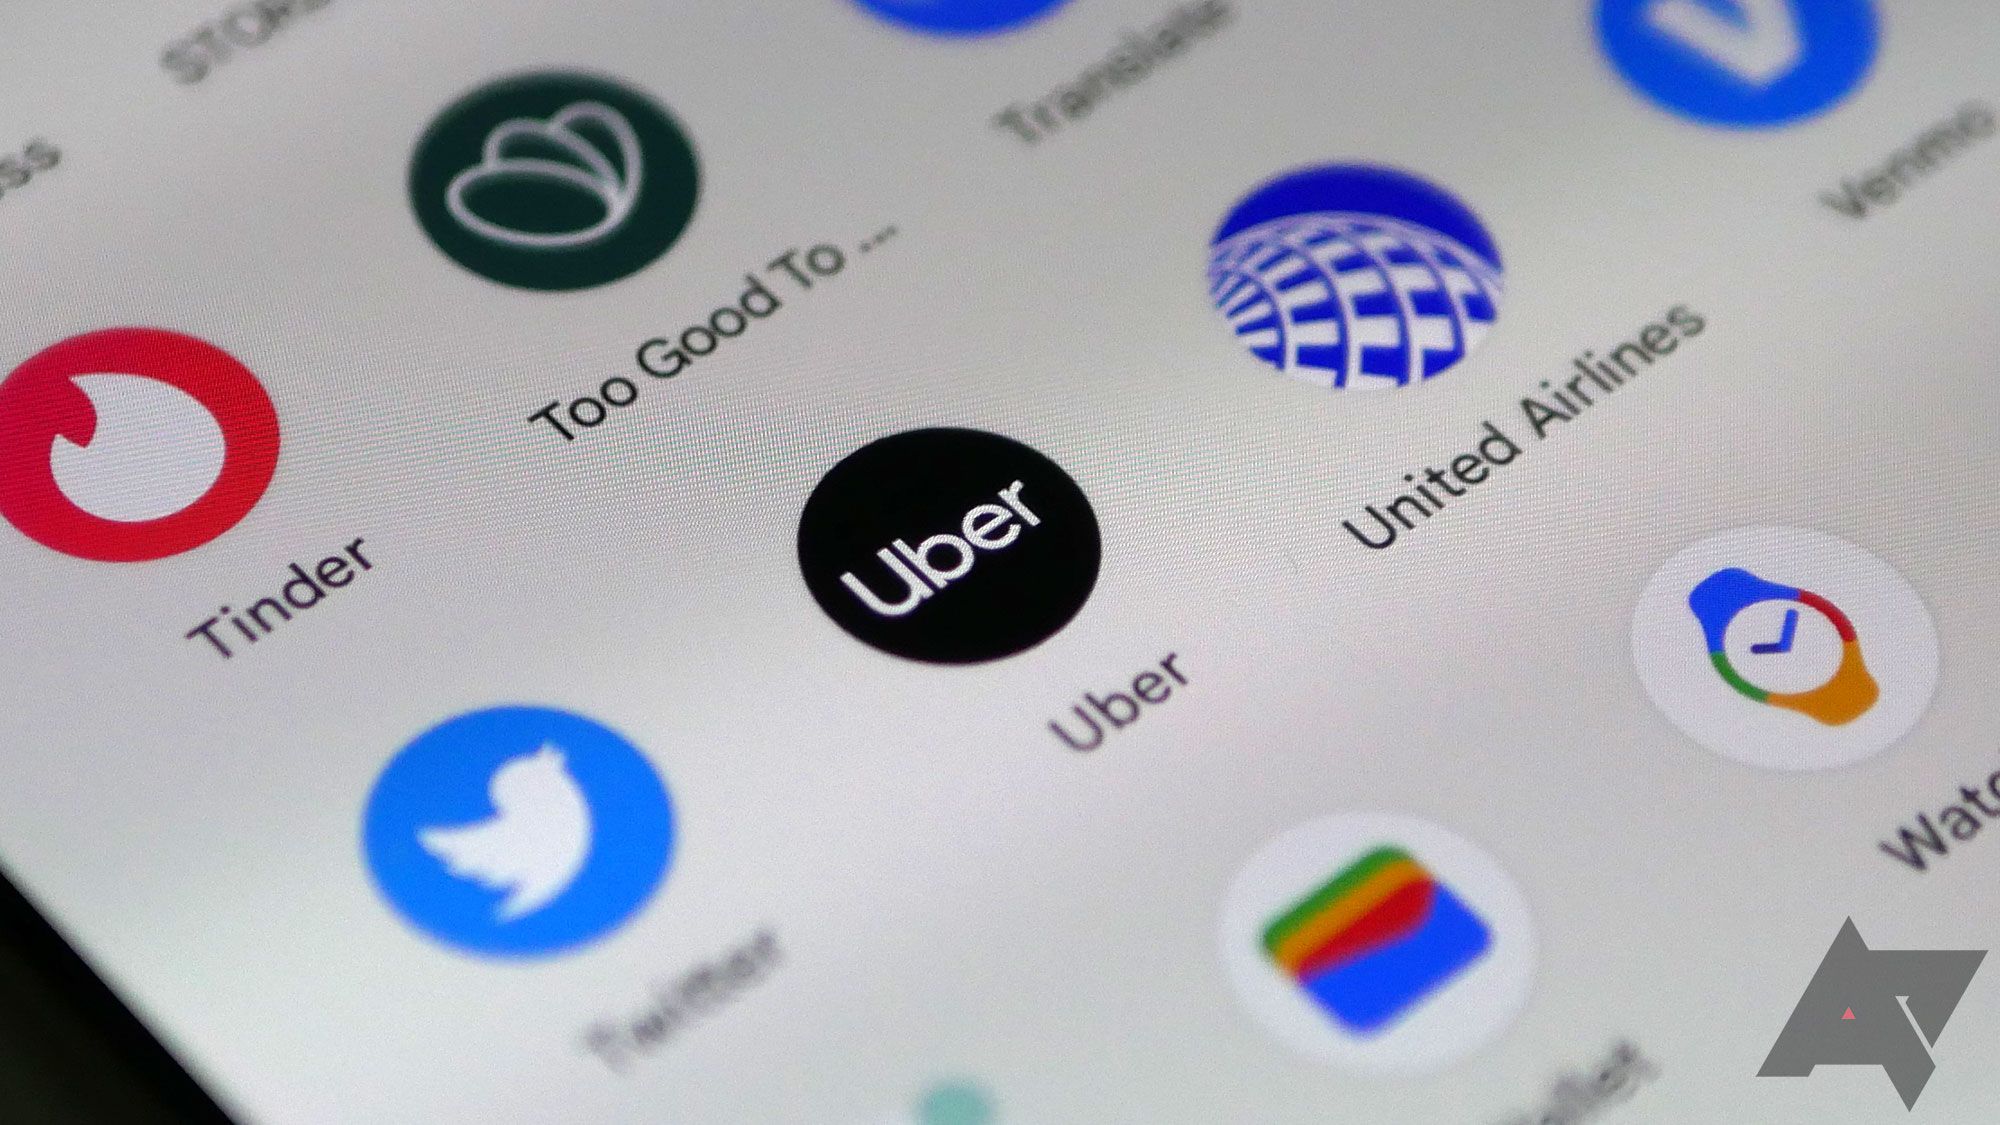 An app drawer on an Android phone with the focus on the Uber app